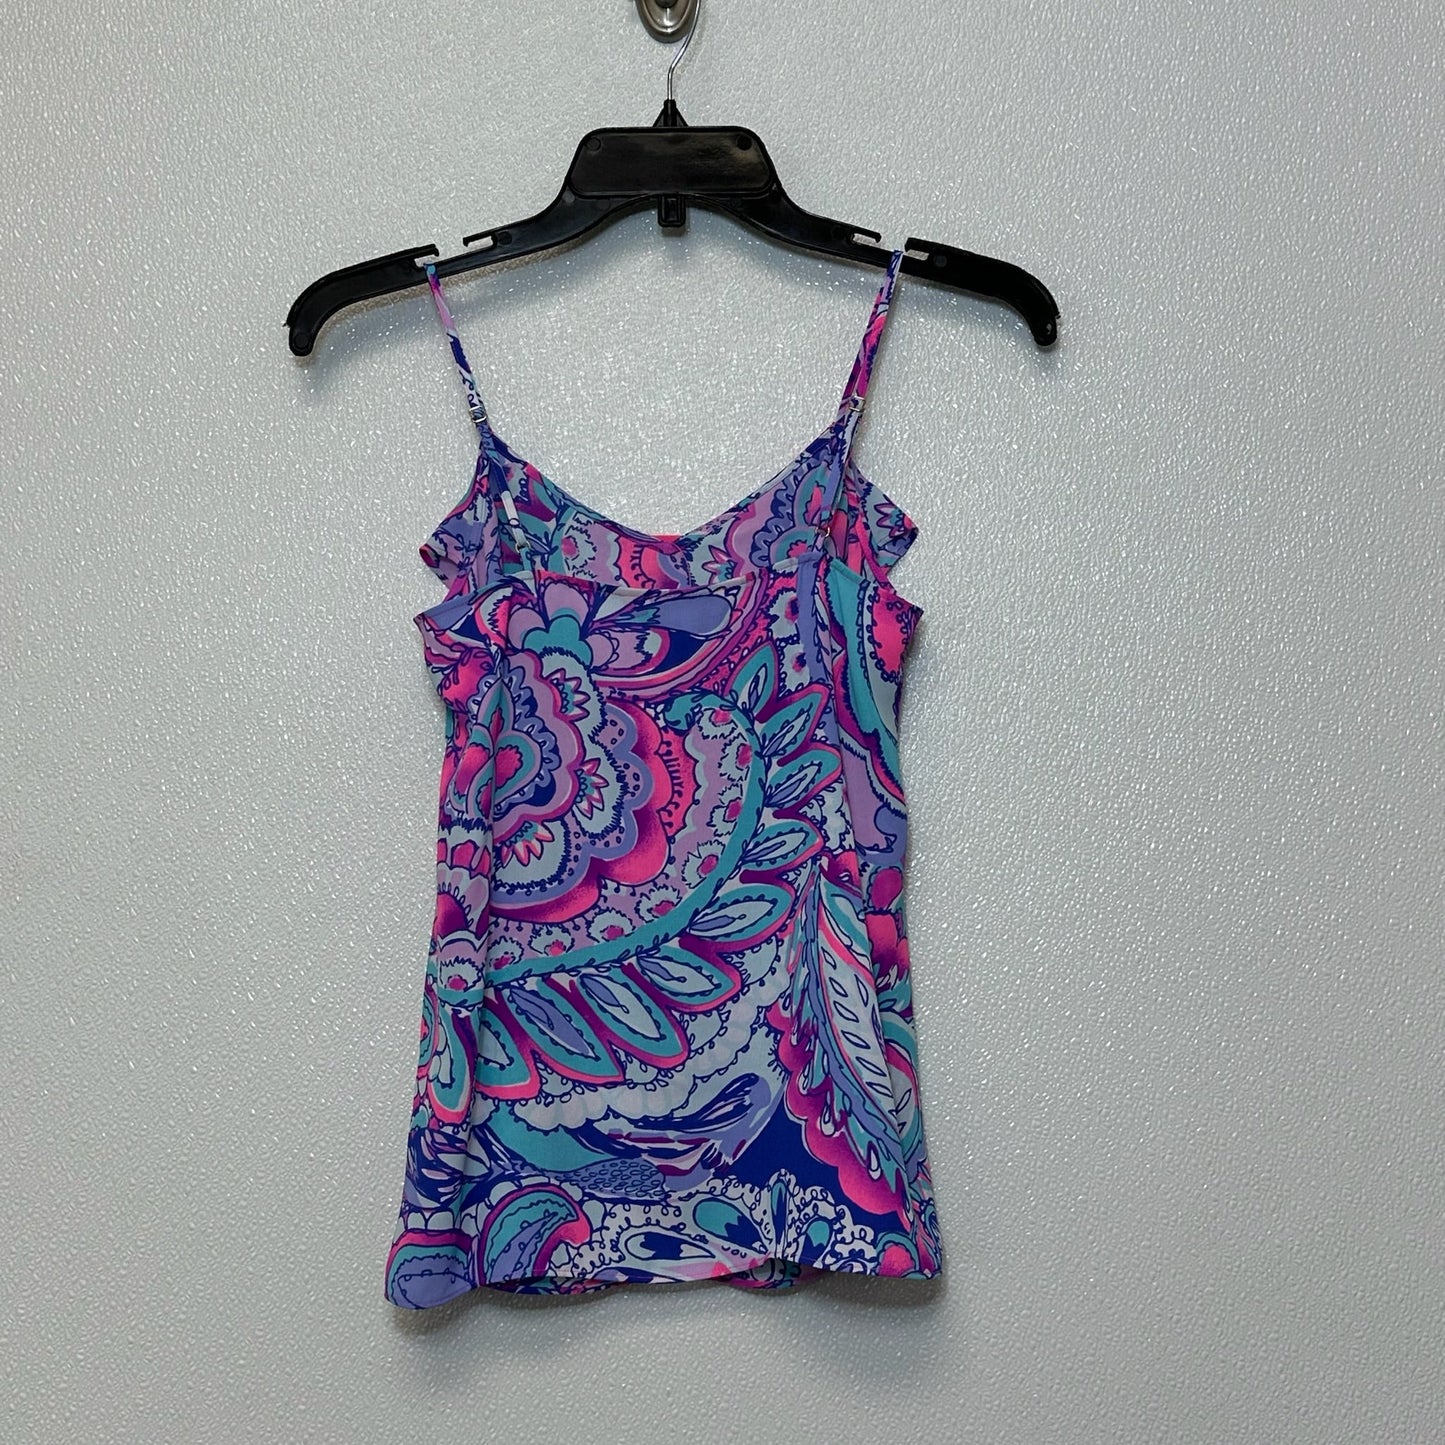 Multi-colored Top Sleeveless Lilly Pulitzer, Size Xxs